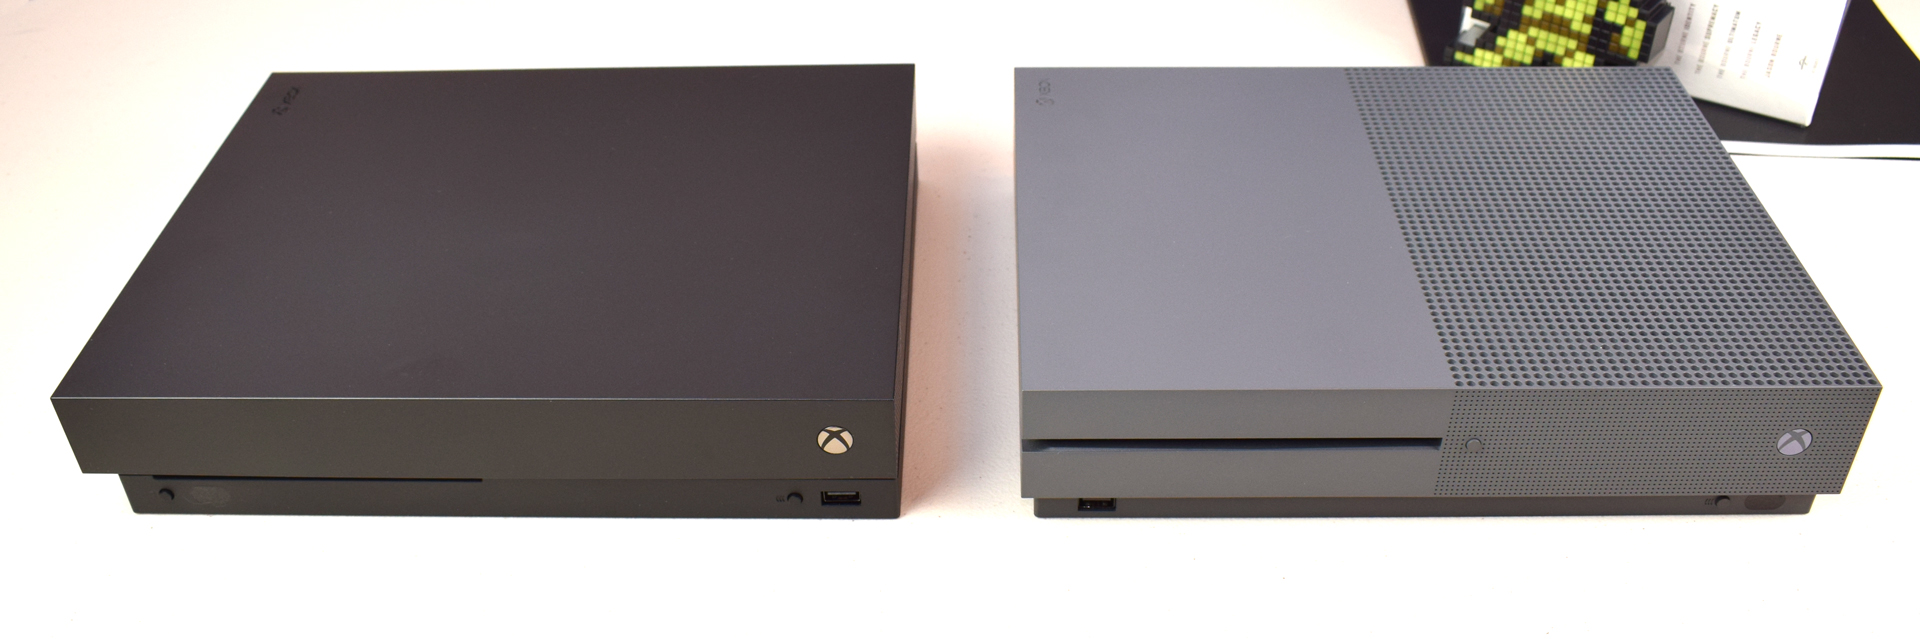 which is better the xbox one x or the xbox one s